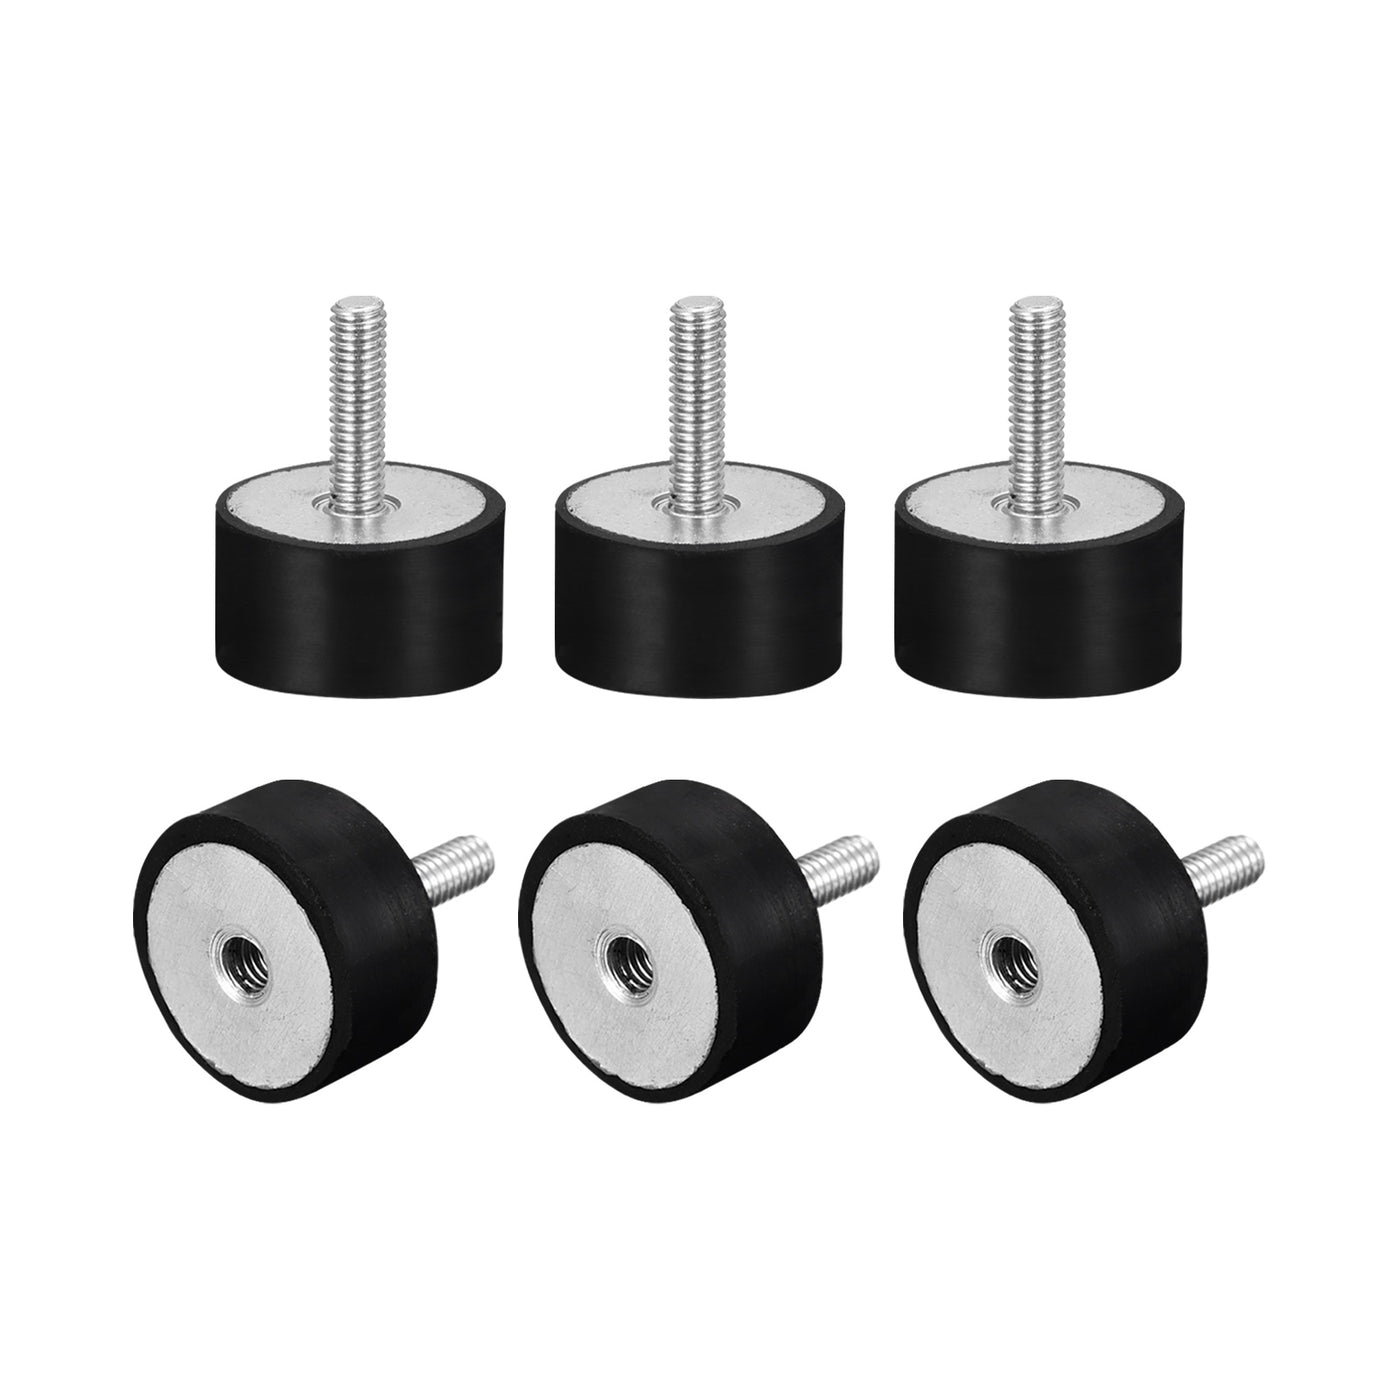 uxcell Uxcell Rubber Mount 6pcs M6 Male/Female Vibration Isolator Shock Absorber, D20mmxH10mm